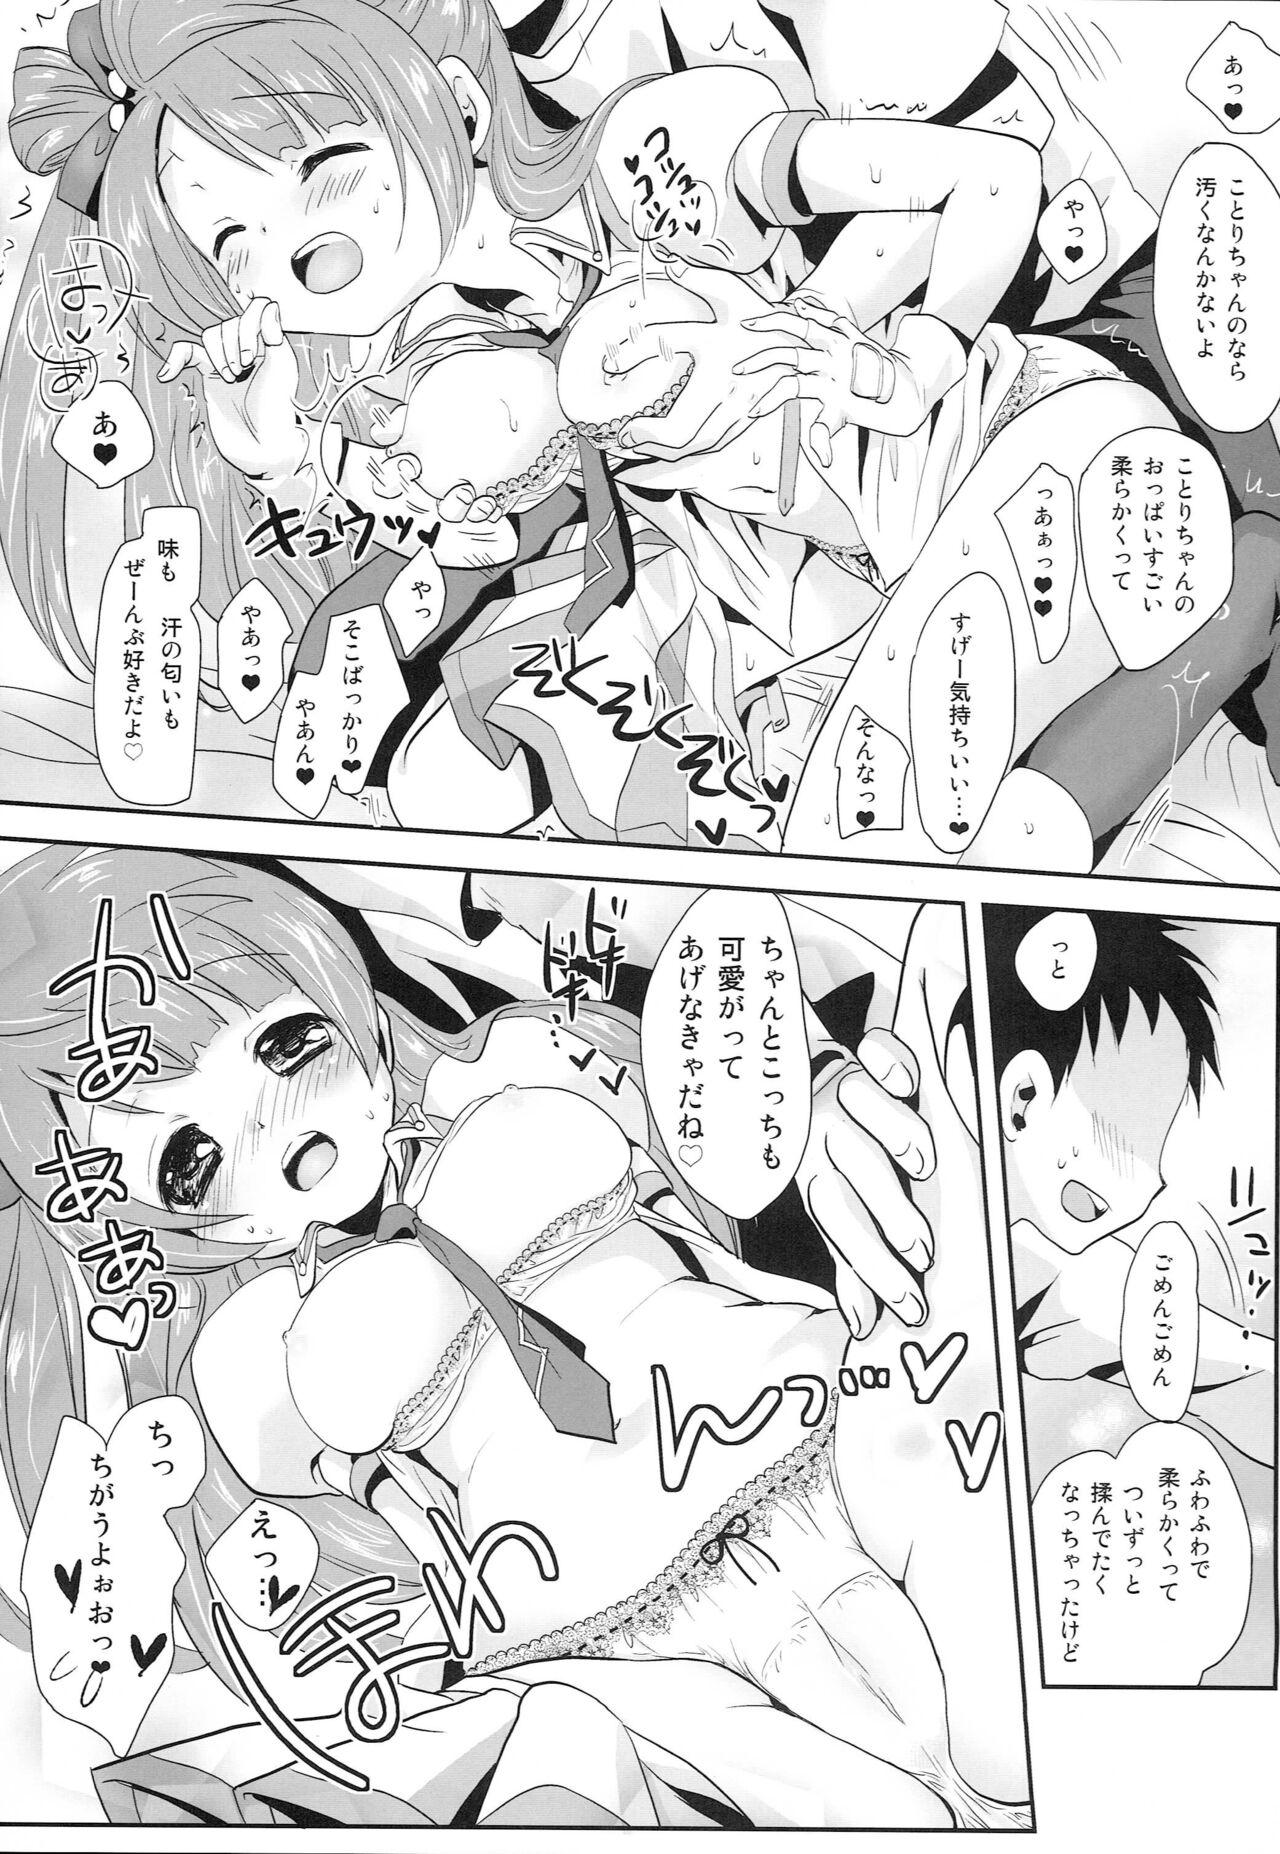 Party KOTORI DREAMING! - Love live Throat - Page 10